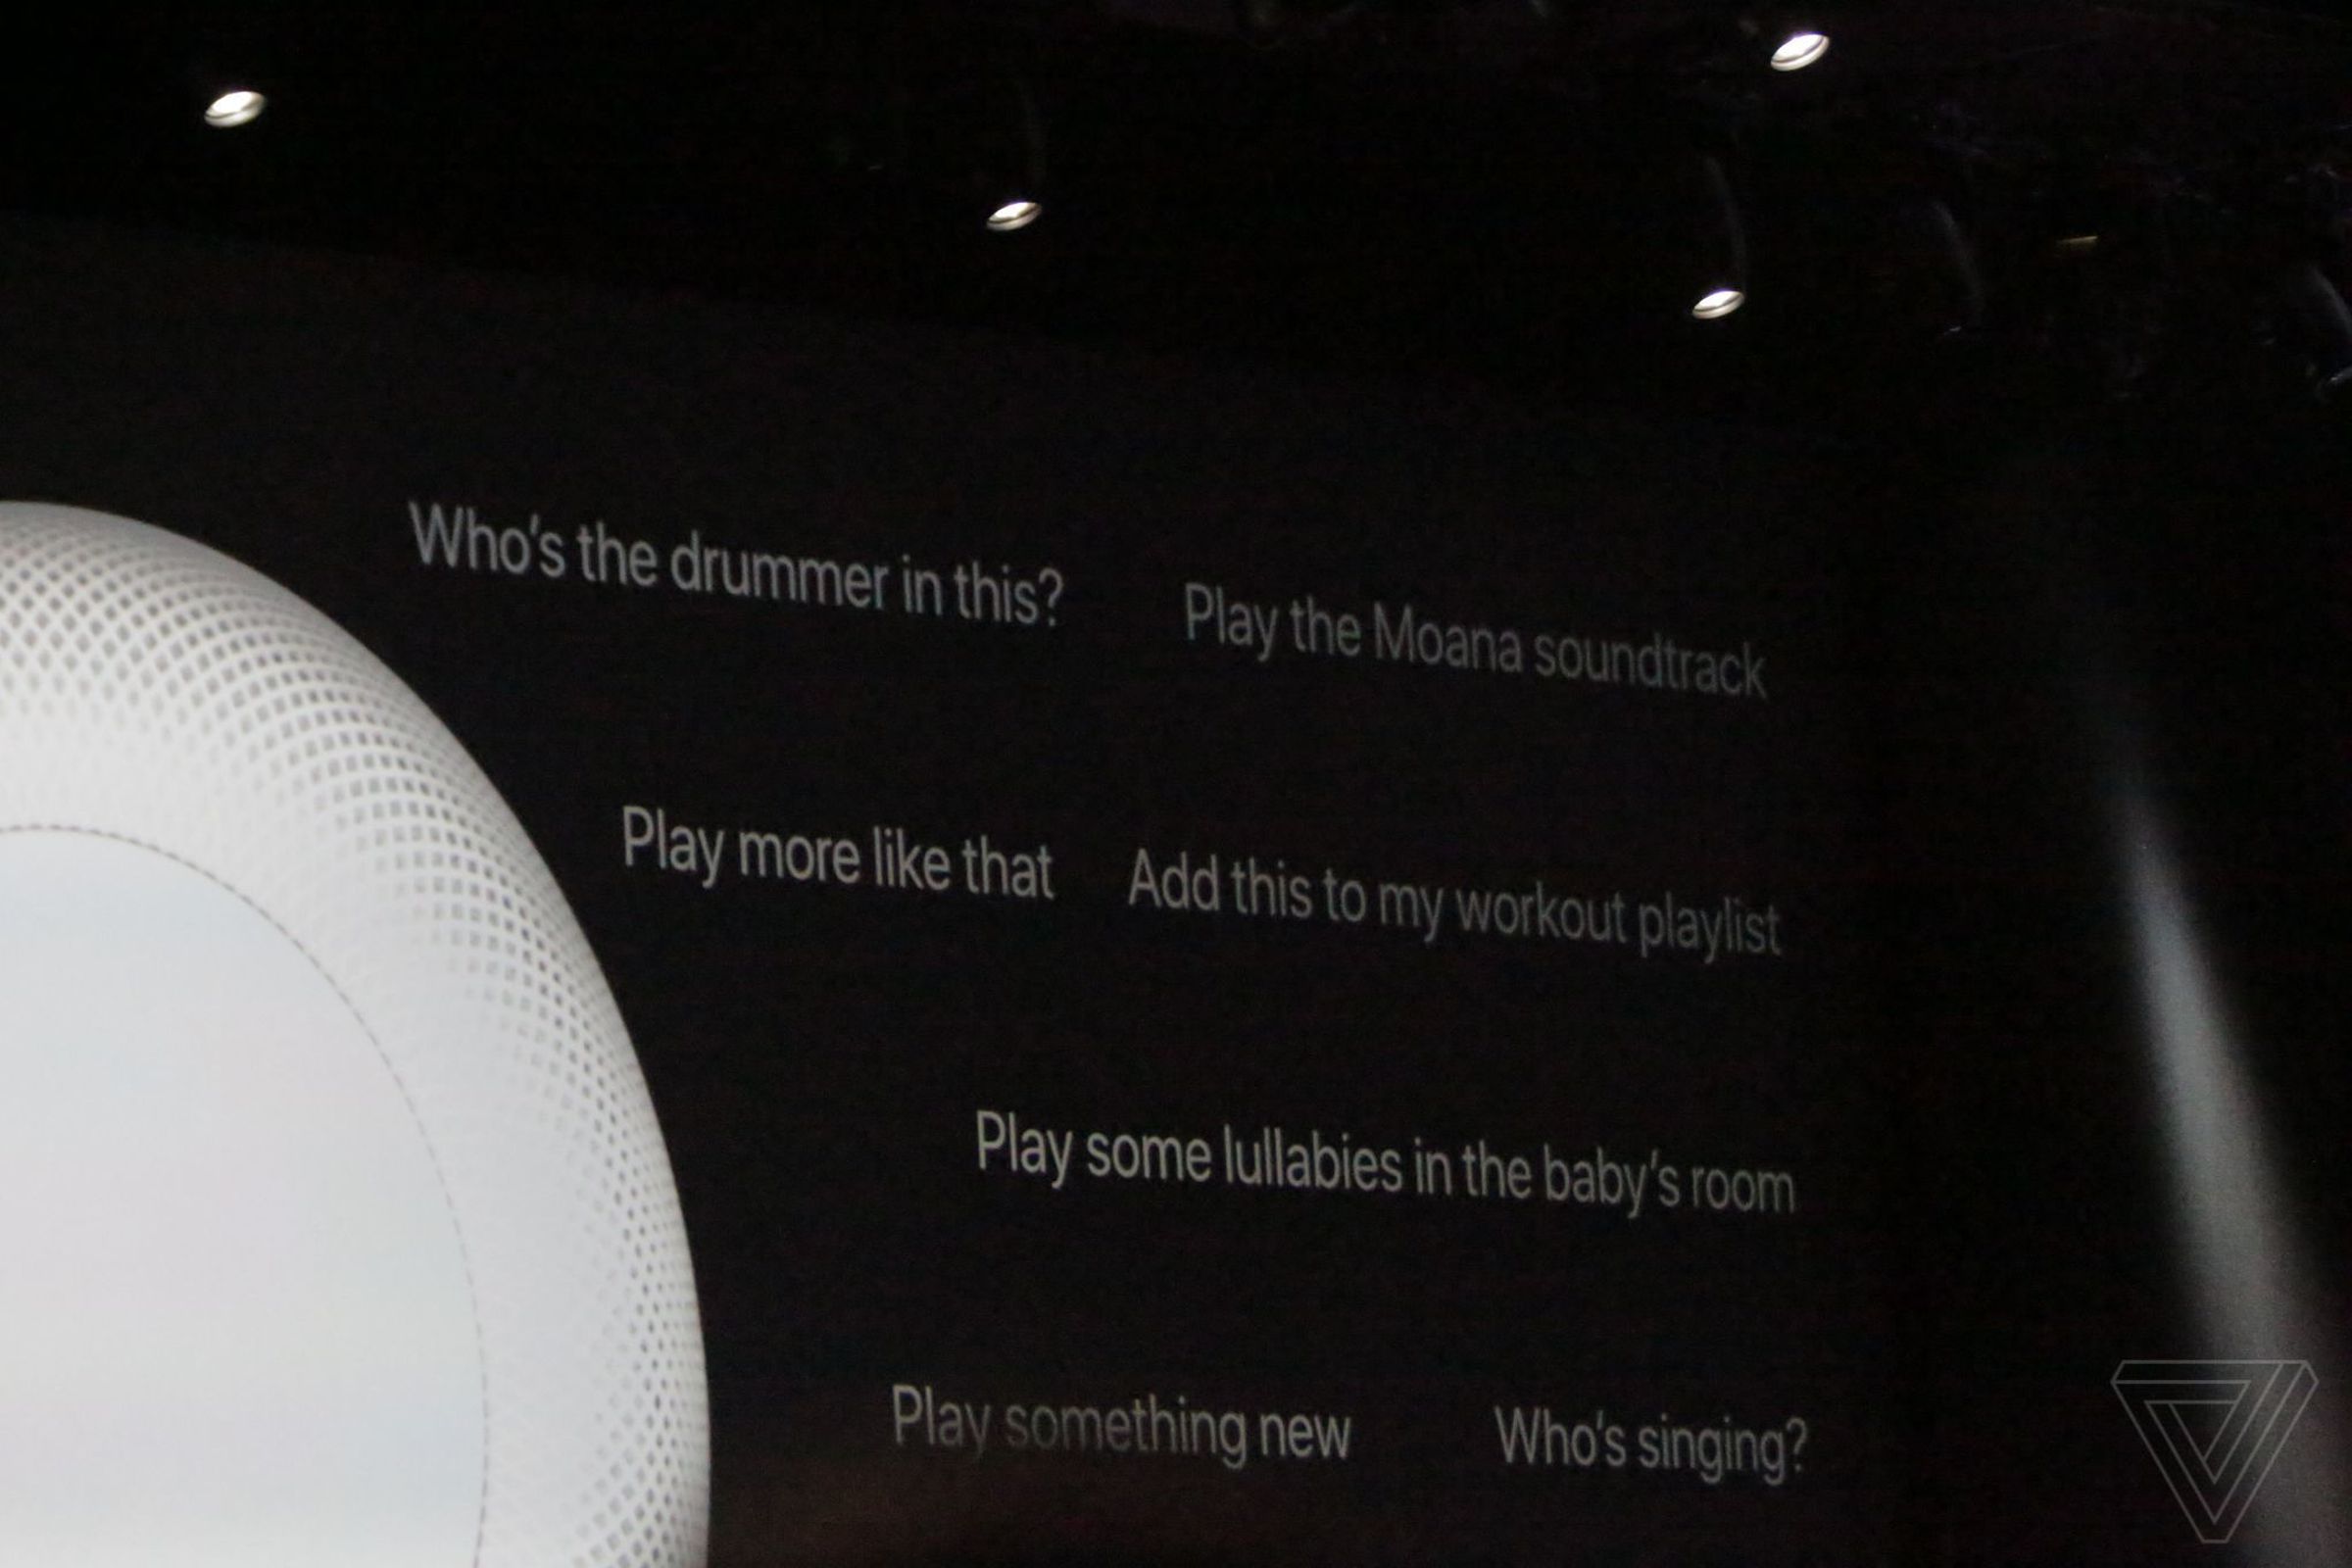 Some of the HomePod commands, like asking Siri to identify the drummer in a song, seem out of the digital assistant’s current reach. 